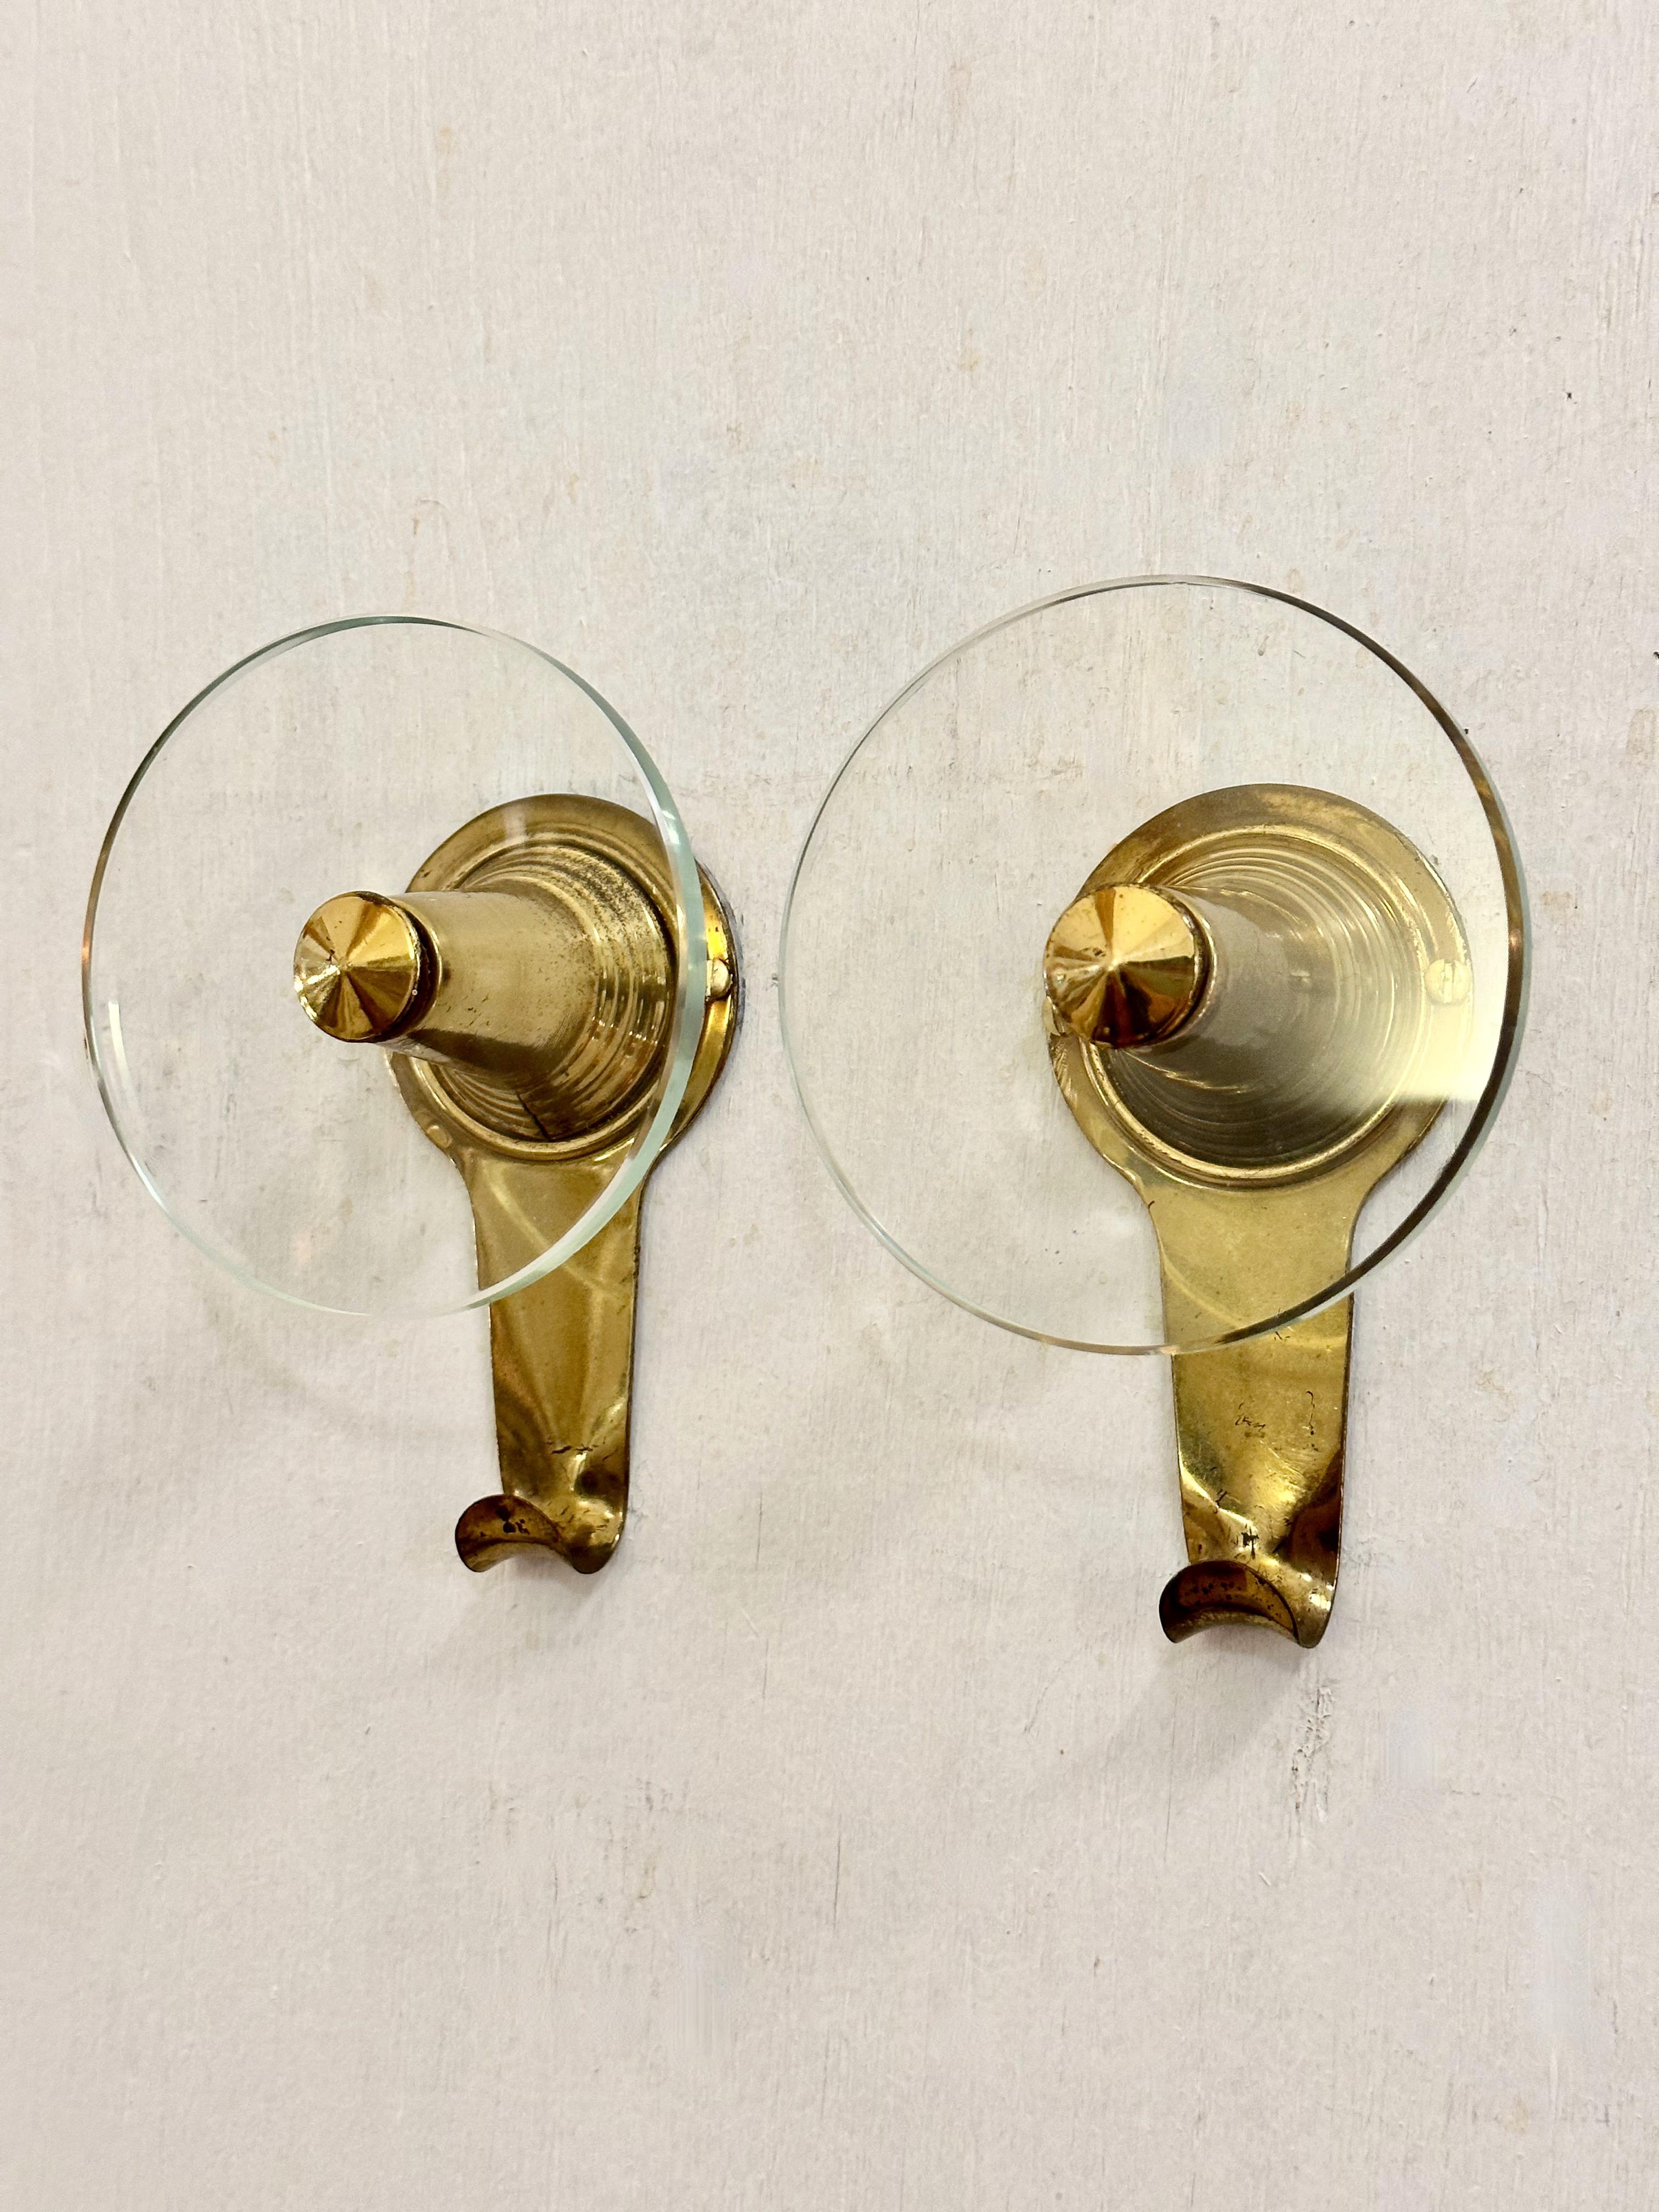 Italian Mid-Centuty Modern Wall Brass and Glass Coat Racks, 1950 In Good Condition For Sale In Madrid, ES